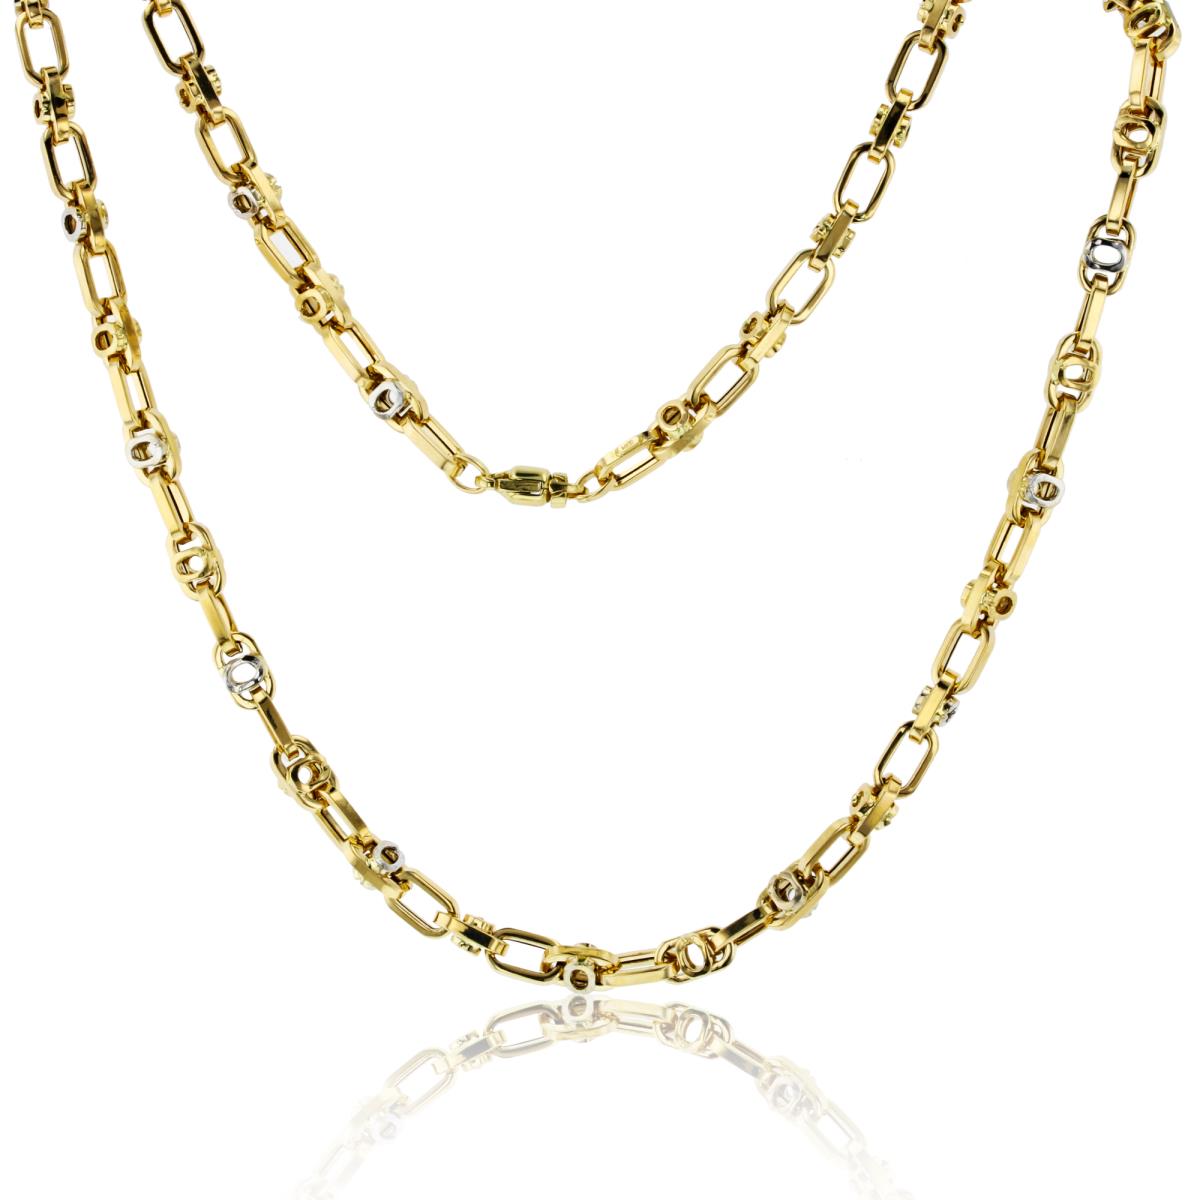 10K Yellow Gold Polished Squared Multi Links 24" Chain